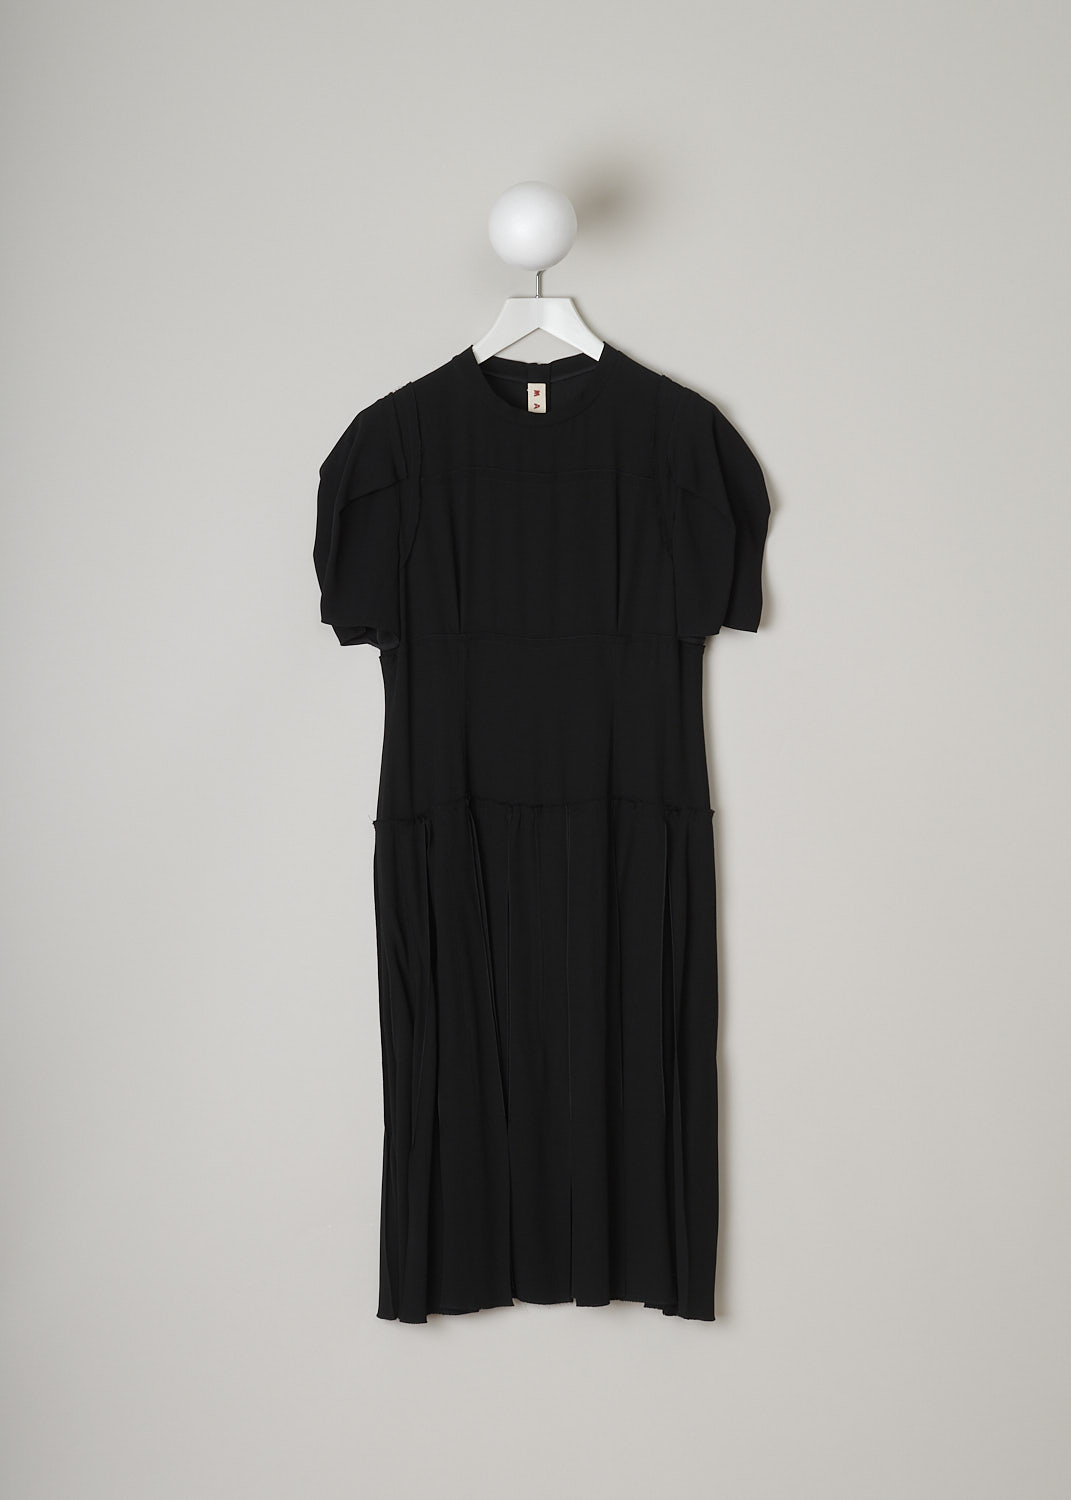 MARNI, BLACK DECONSTRUCTED DRESS, ABMA0096FY_TV285_00N99, Black, Front, This black deconstructed dress has a round neckline and short puff sleeves. The dress has a paneled bodice with exposed seams and raw edges and a box pleated skirt. A concealed centre zip in the back functions as the closure option.   
